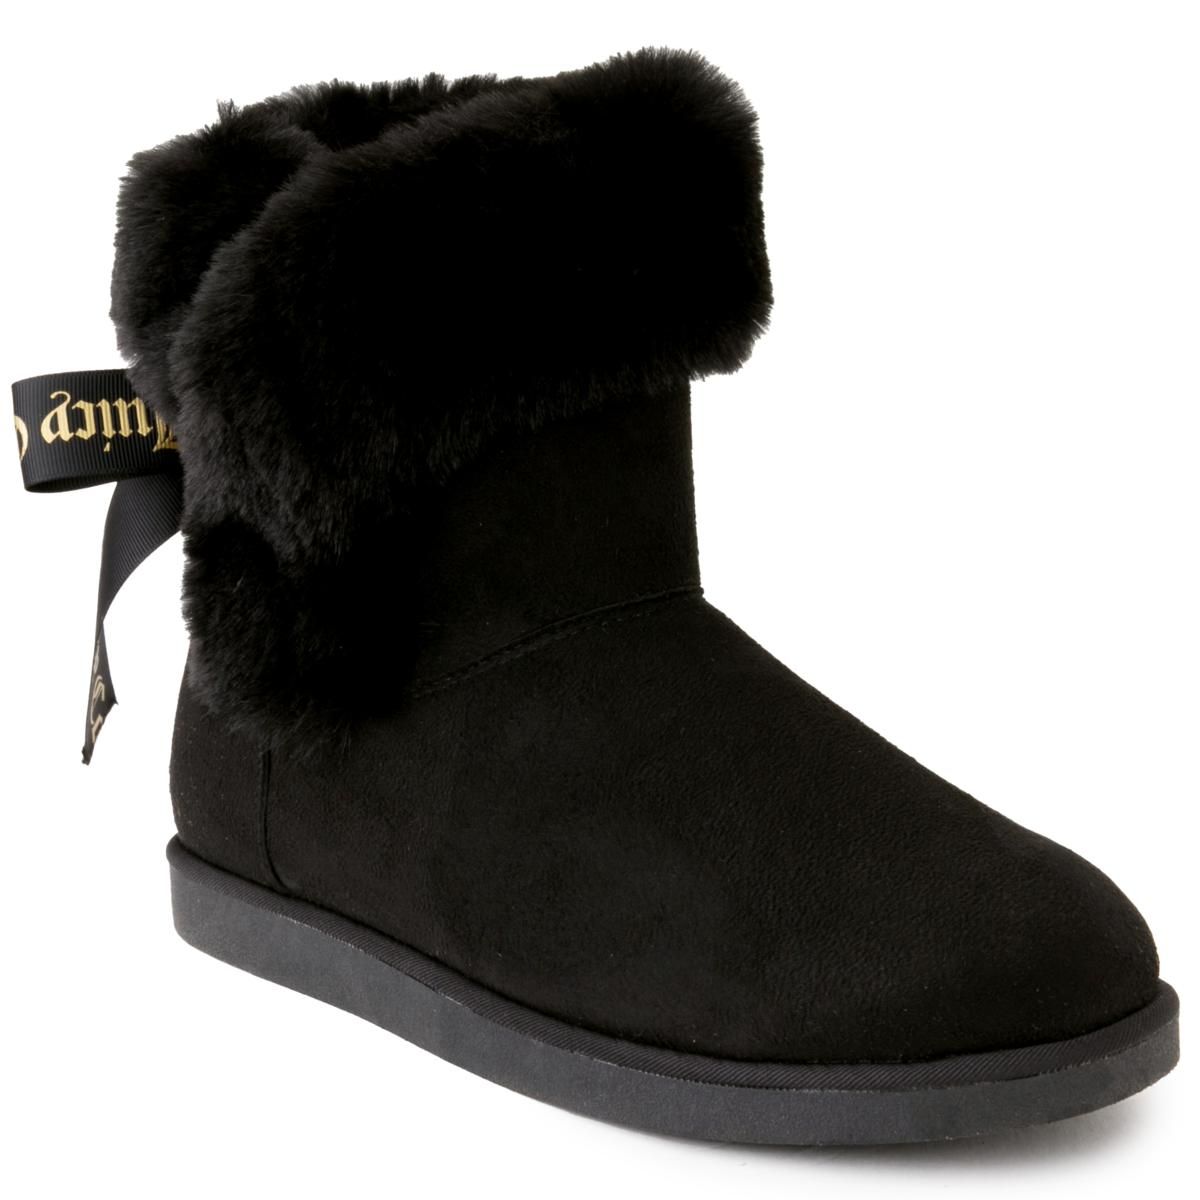 Juicy Couture King Ankle Winter Boot | HSN